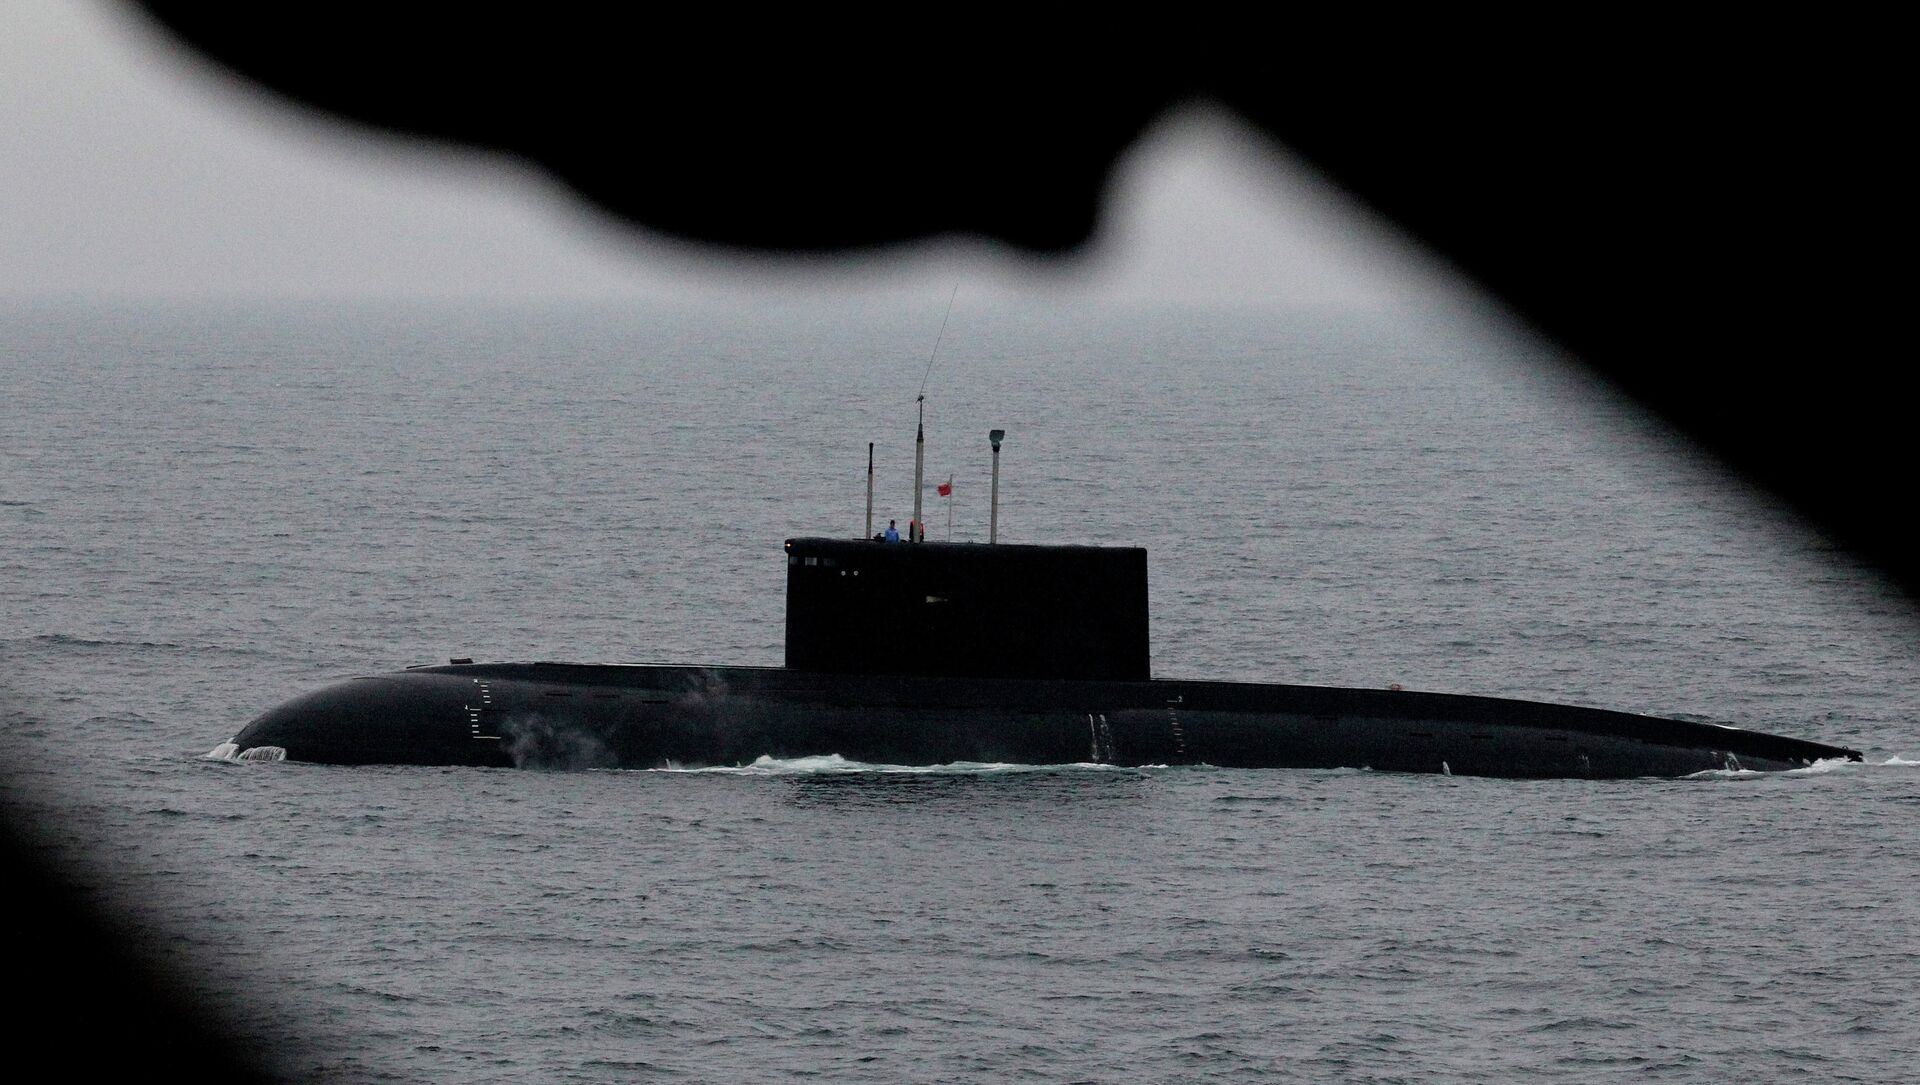 Russian navy conducts submarine rescue exercise - Sputnik International, 1920, 10.07.2021